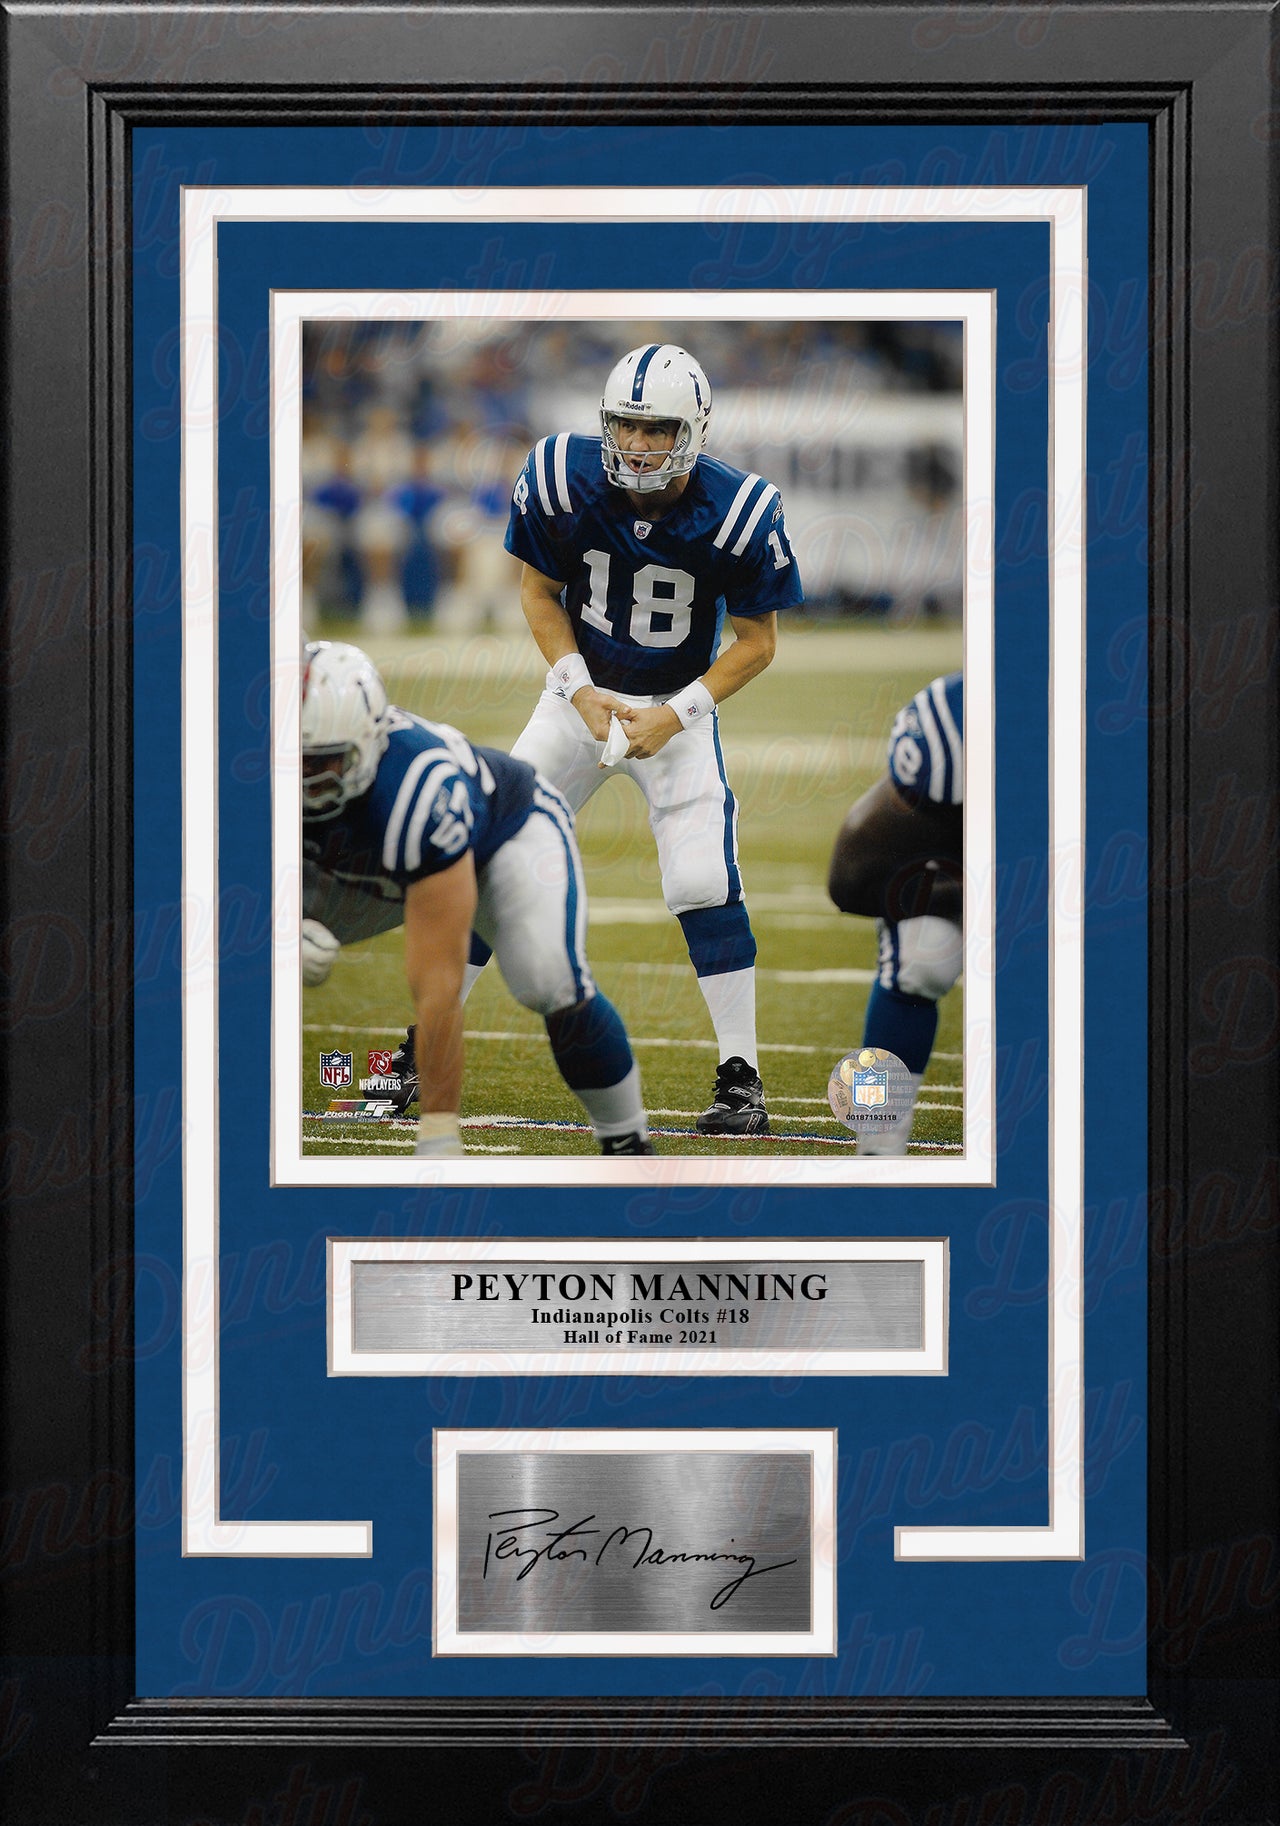 Peyton Manning Under Center Indianapolis Colts 8x10 Framed Football Photo with Engraved Autograph - Dynasty Sports & Framing 